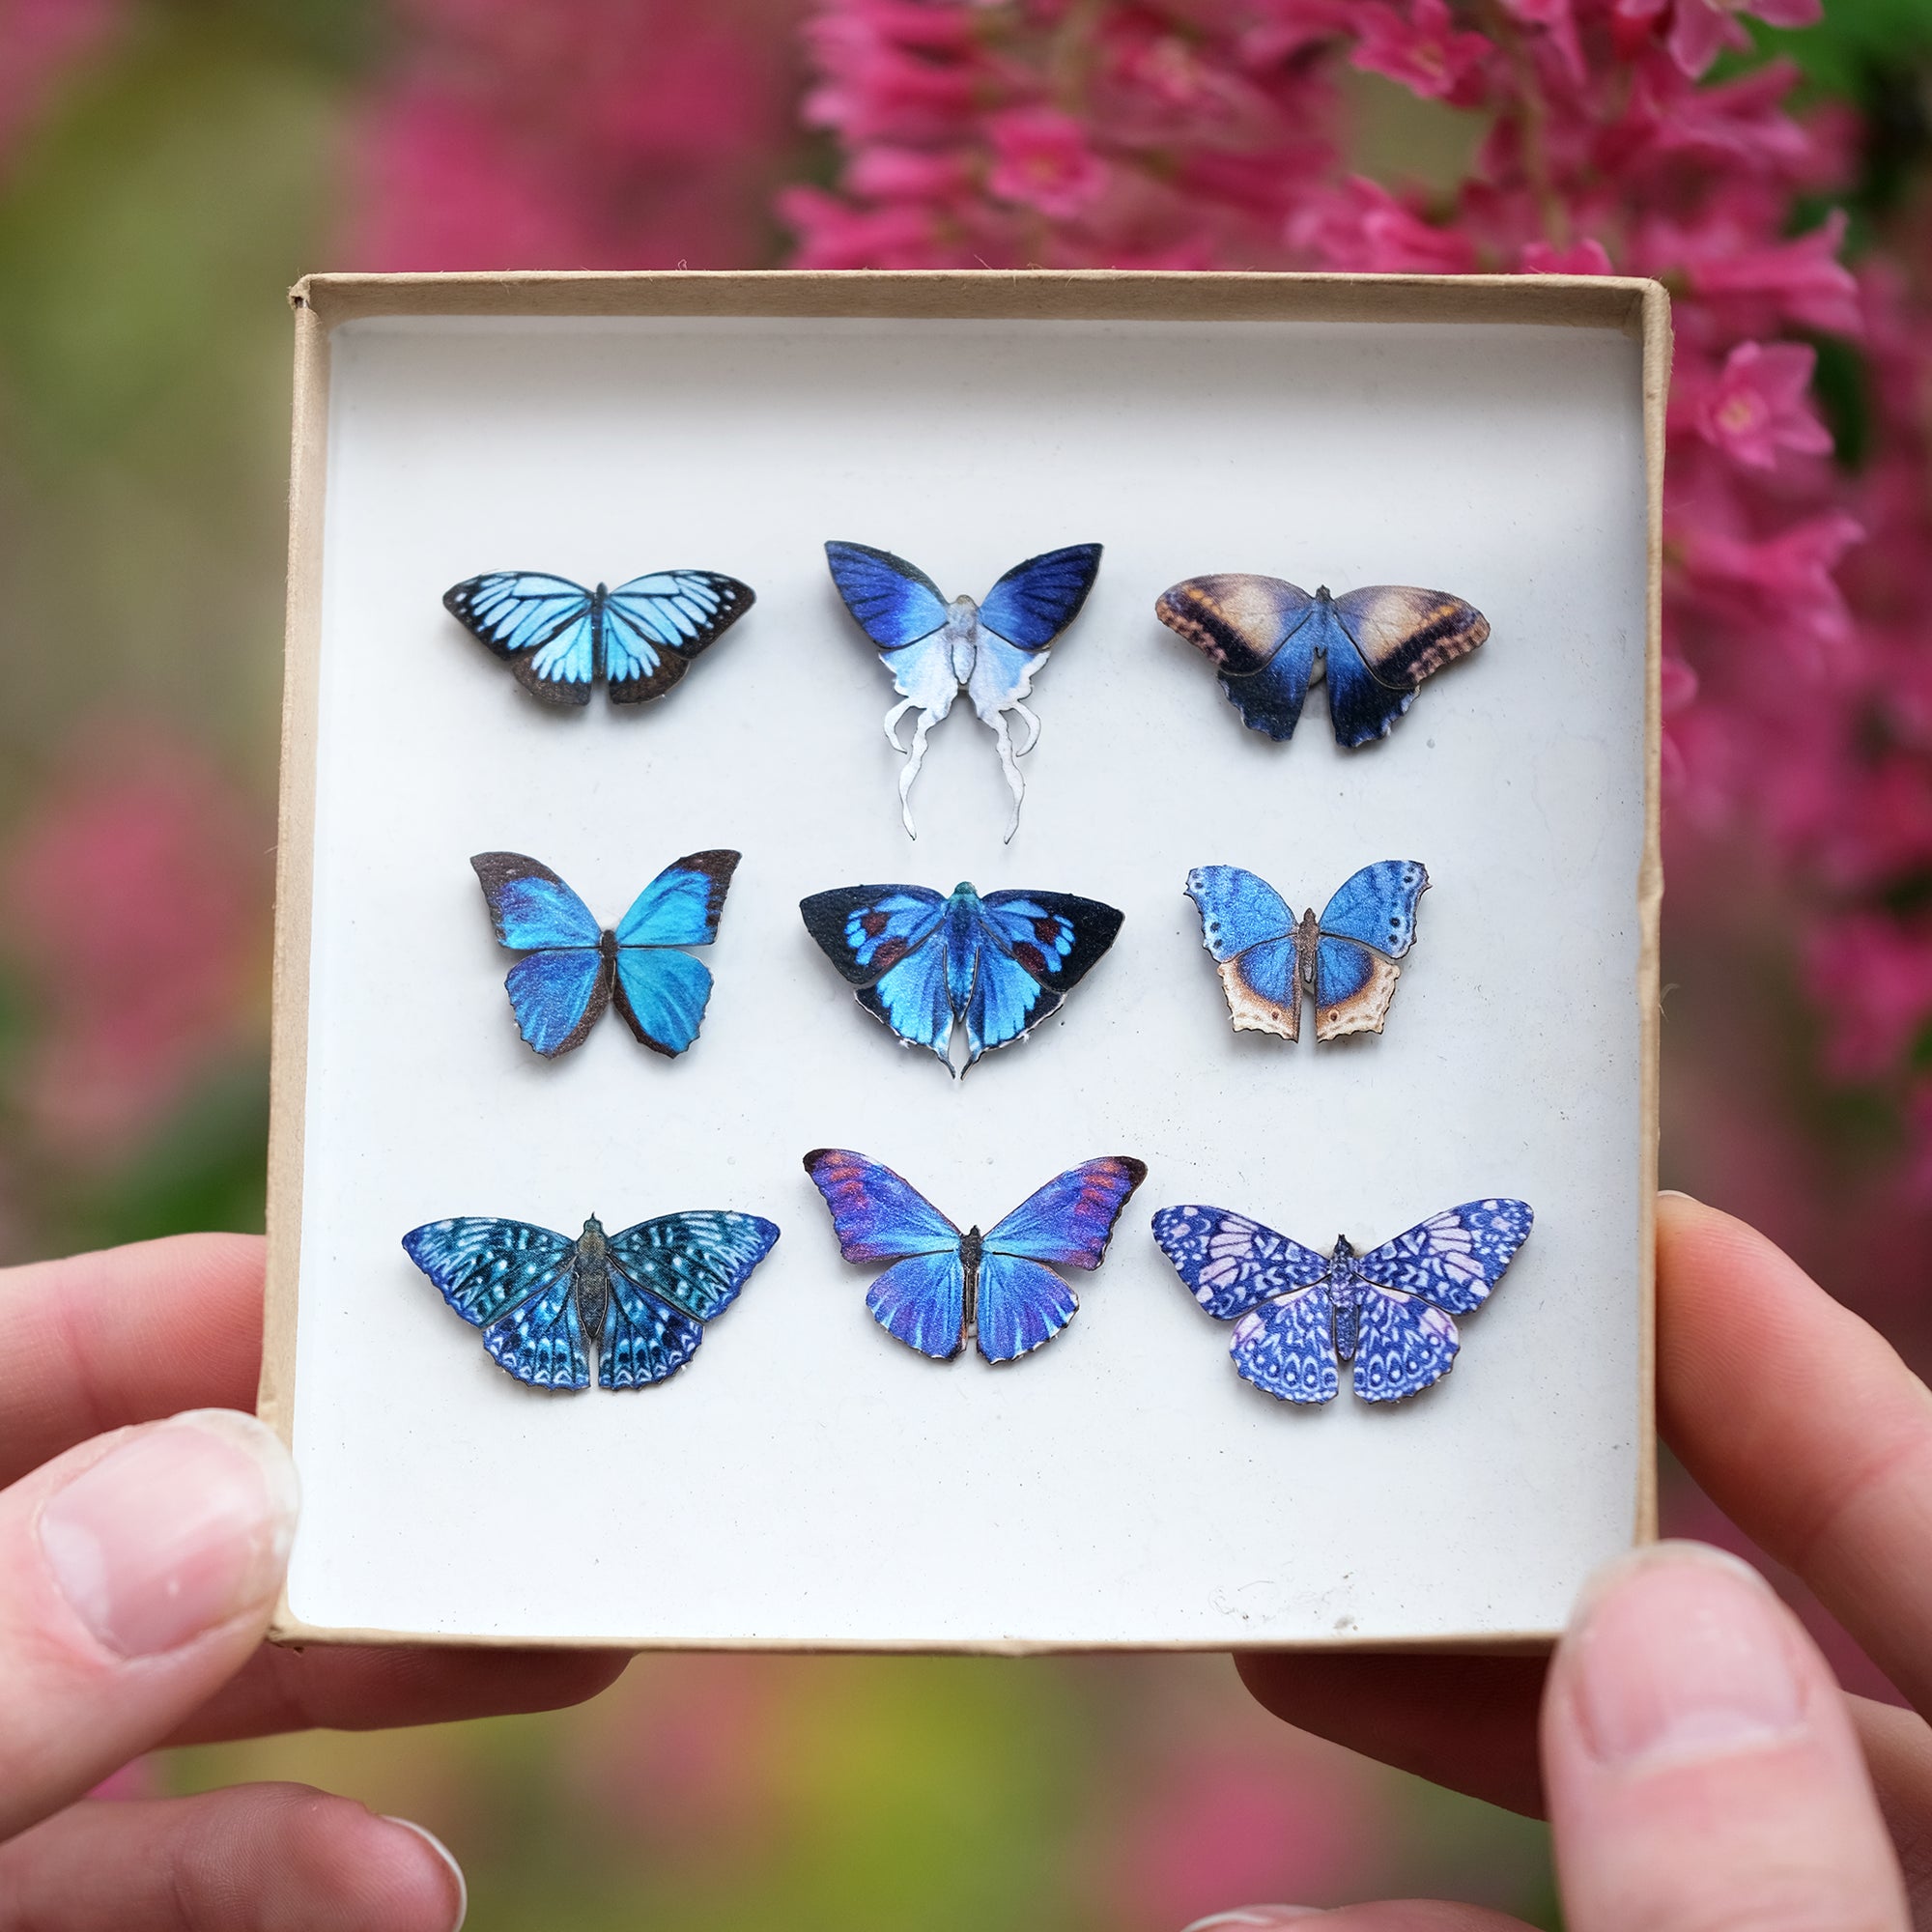 ’Galaxy' Micro Moth & Butterfly Collection